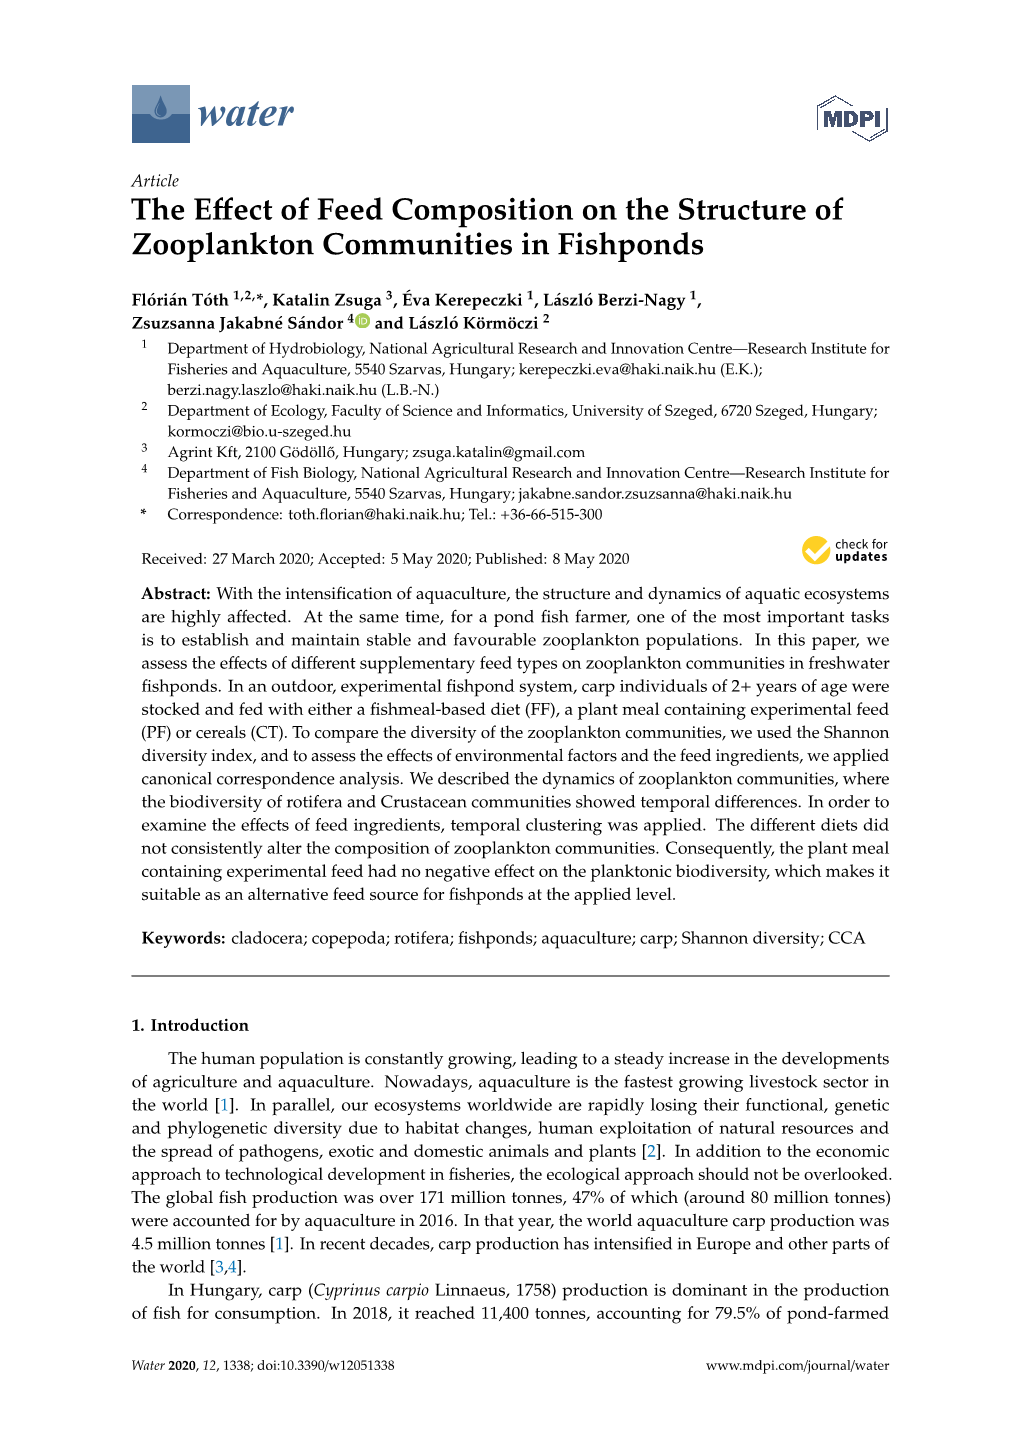 The Effect of Feed Composition on the Structure of Zooplankton